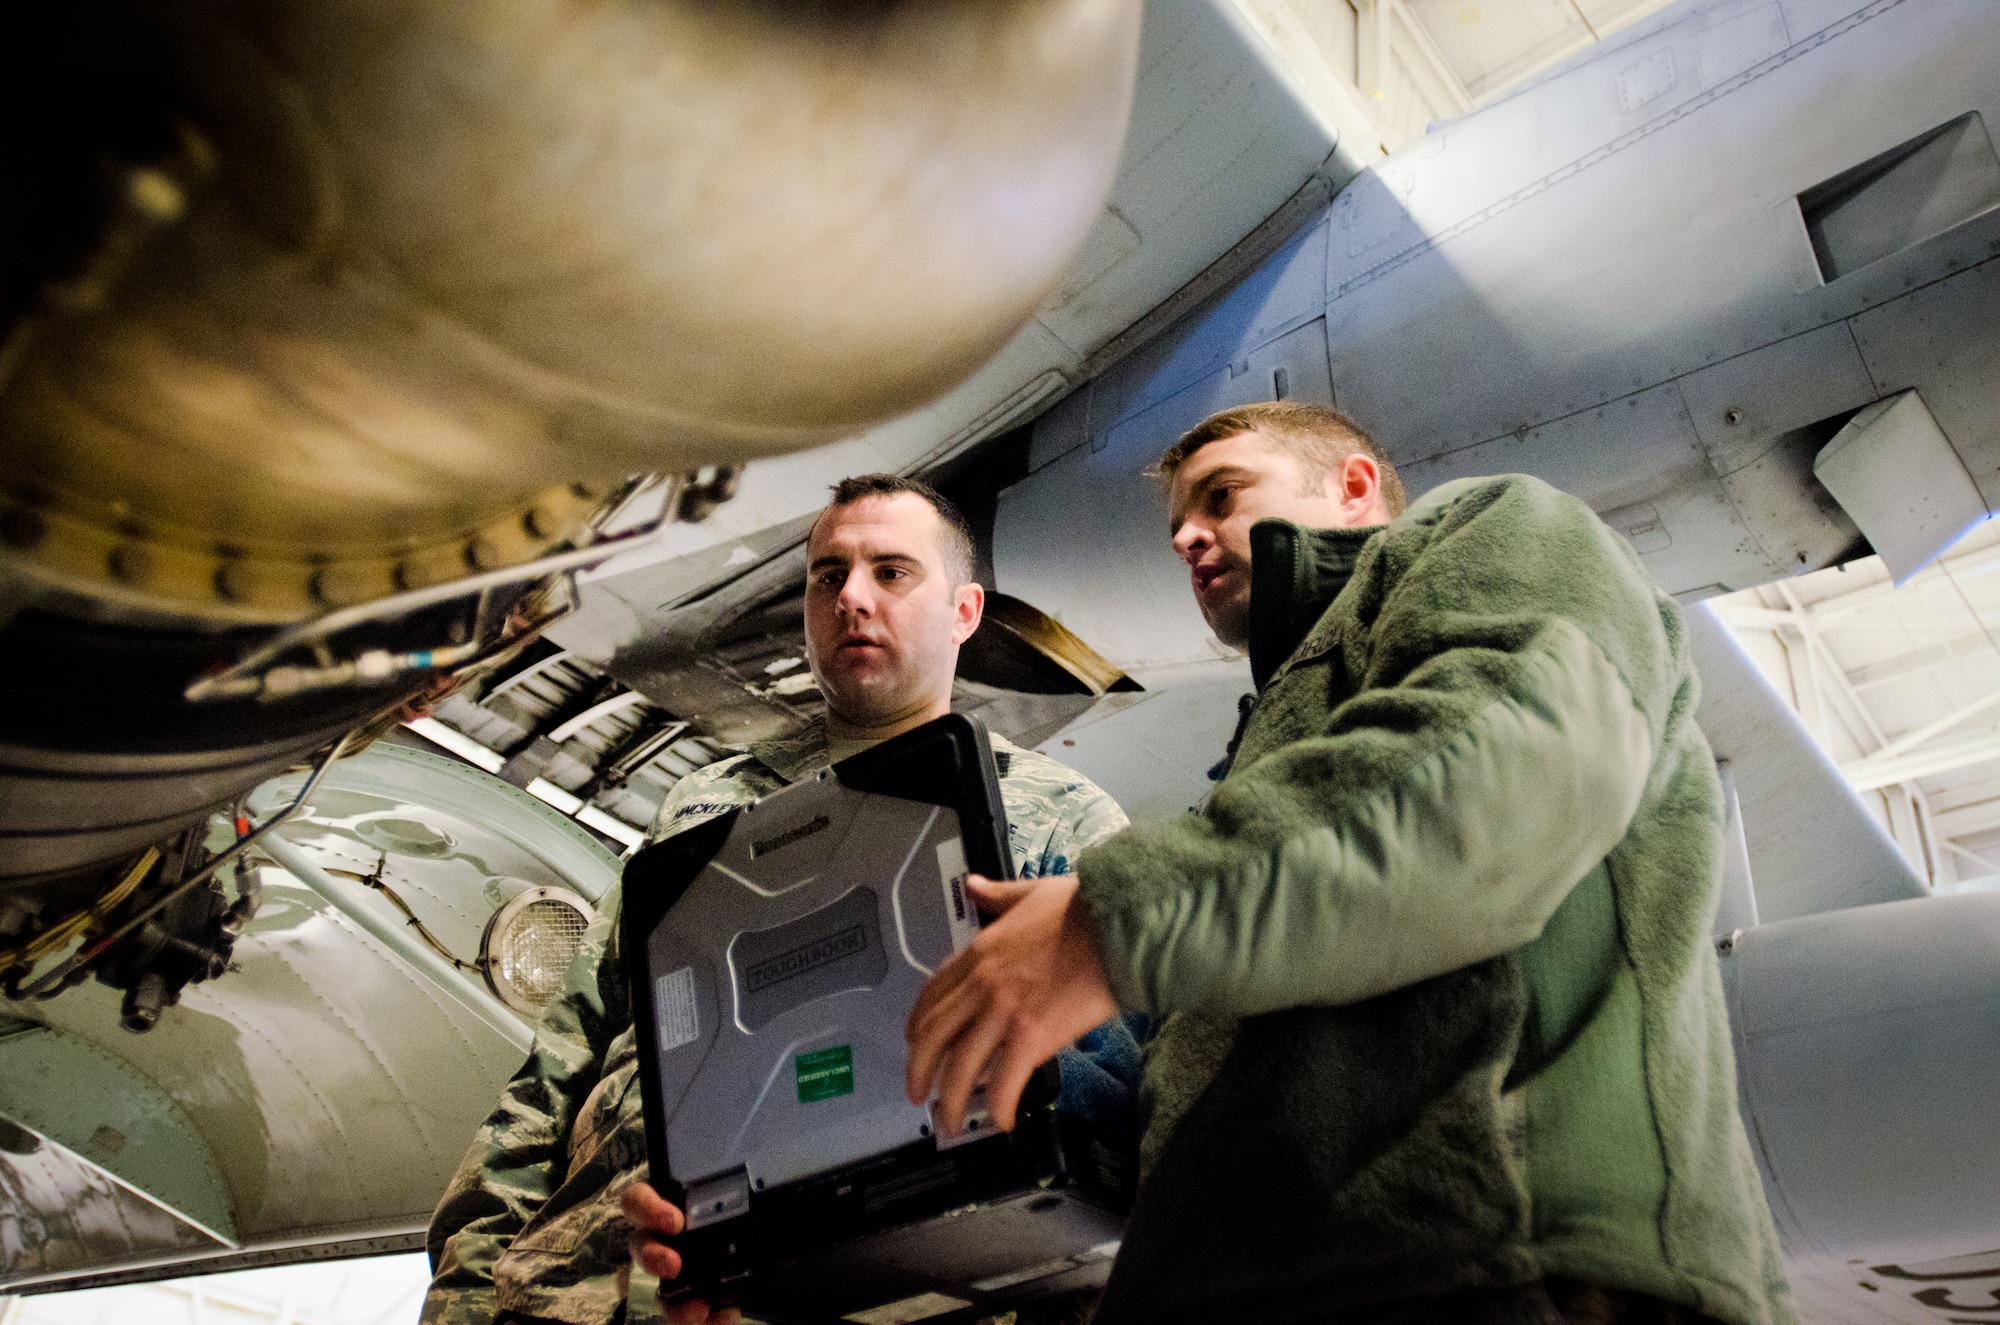 Tech. Sgt. Mike Johnson (right), a crew chief from the Kentucky Air National Guard's 123rd Aircraft Maintenance Squadron, shows Staff Sgt. Brian Hinckley, a crew chief from the Connecticut Air National Guard's 103rd Aircraft Maintenance Squadron, different maintenance aspects of the C-130 Hercules aircraft at the Kentucky Air National Guard base in Louisville, Ky., on Nov. 14, 2013. The Connecticut unit is converting from C-21A Learjets to the Hercules transport. (U.S. Air National Guard photo by Master Sgt. Phil Speck)